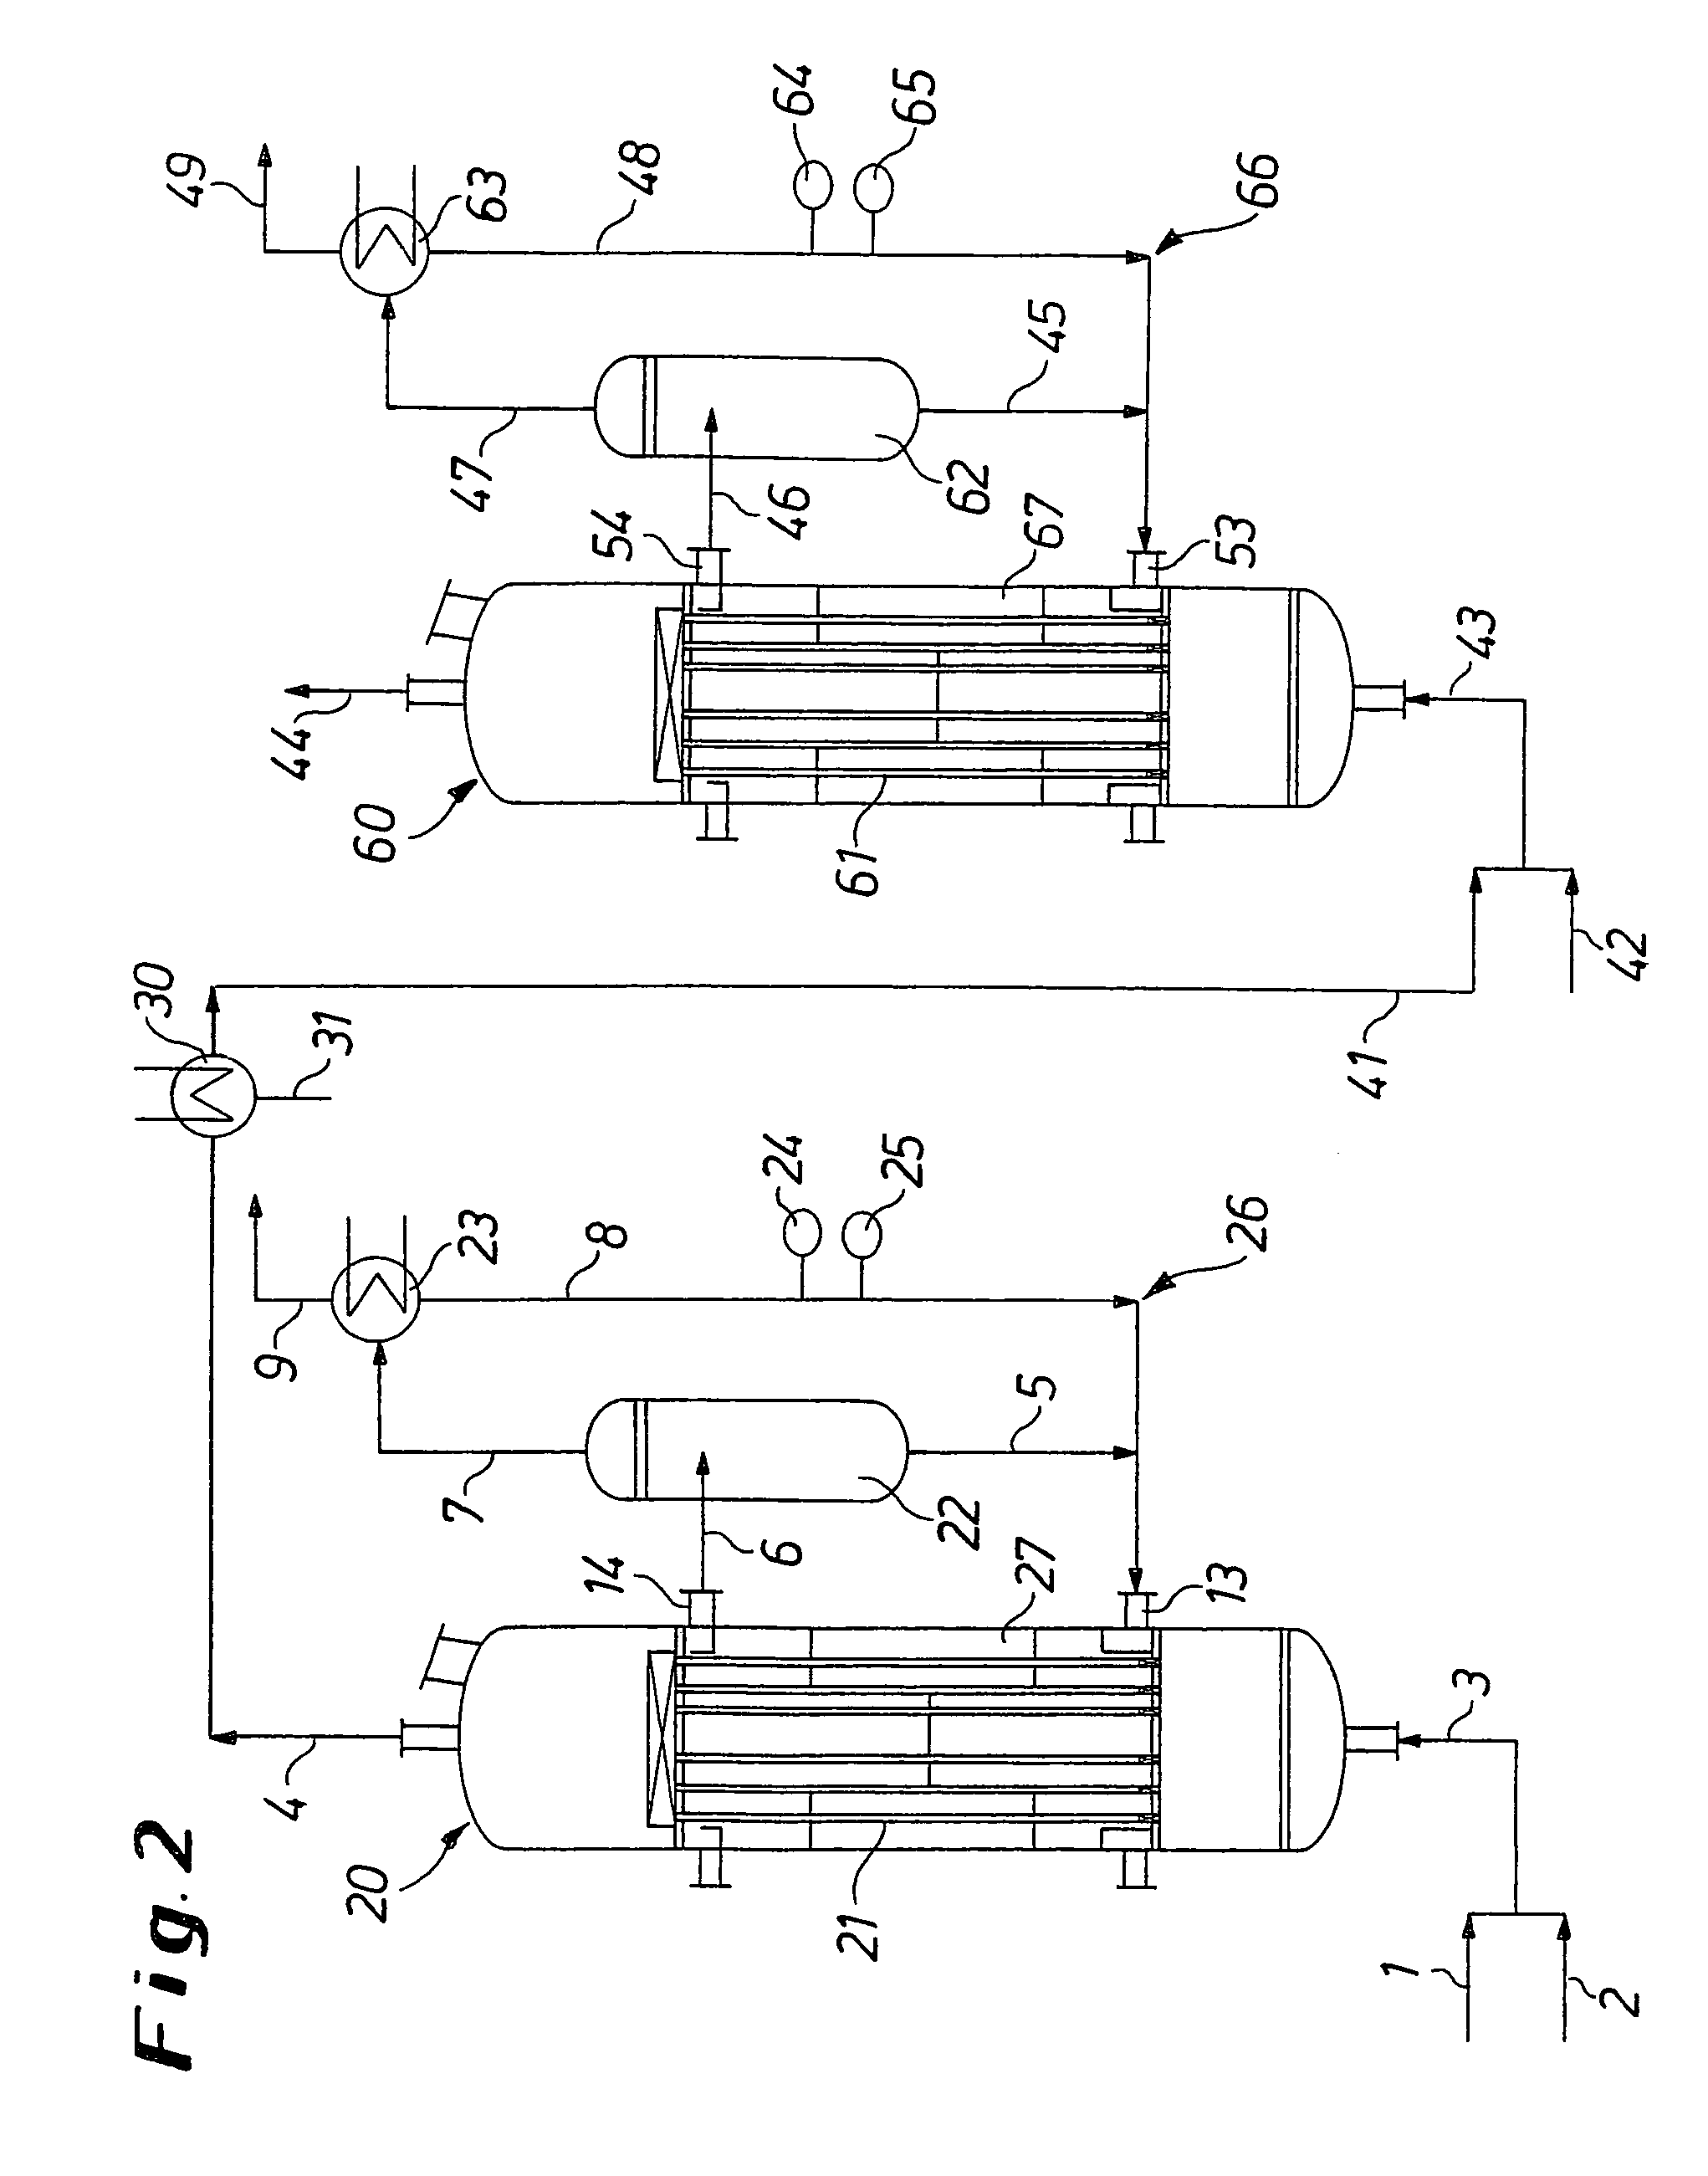 Process and apparatus for the production of phosgene